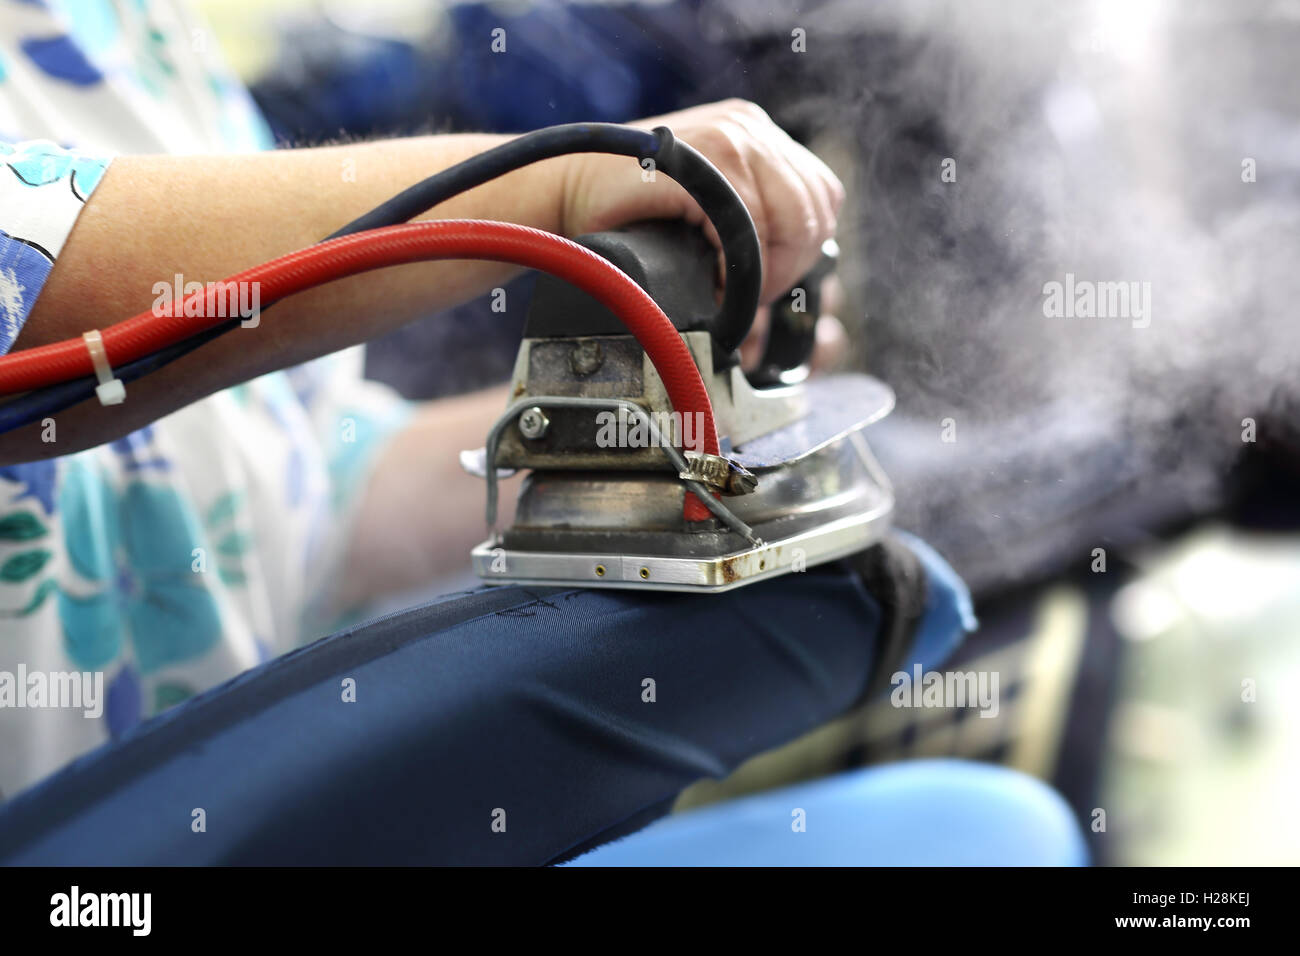 Clothing industry. Ironing steam. Presser in sewing clothes pressed. Stock Photo